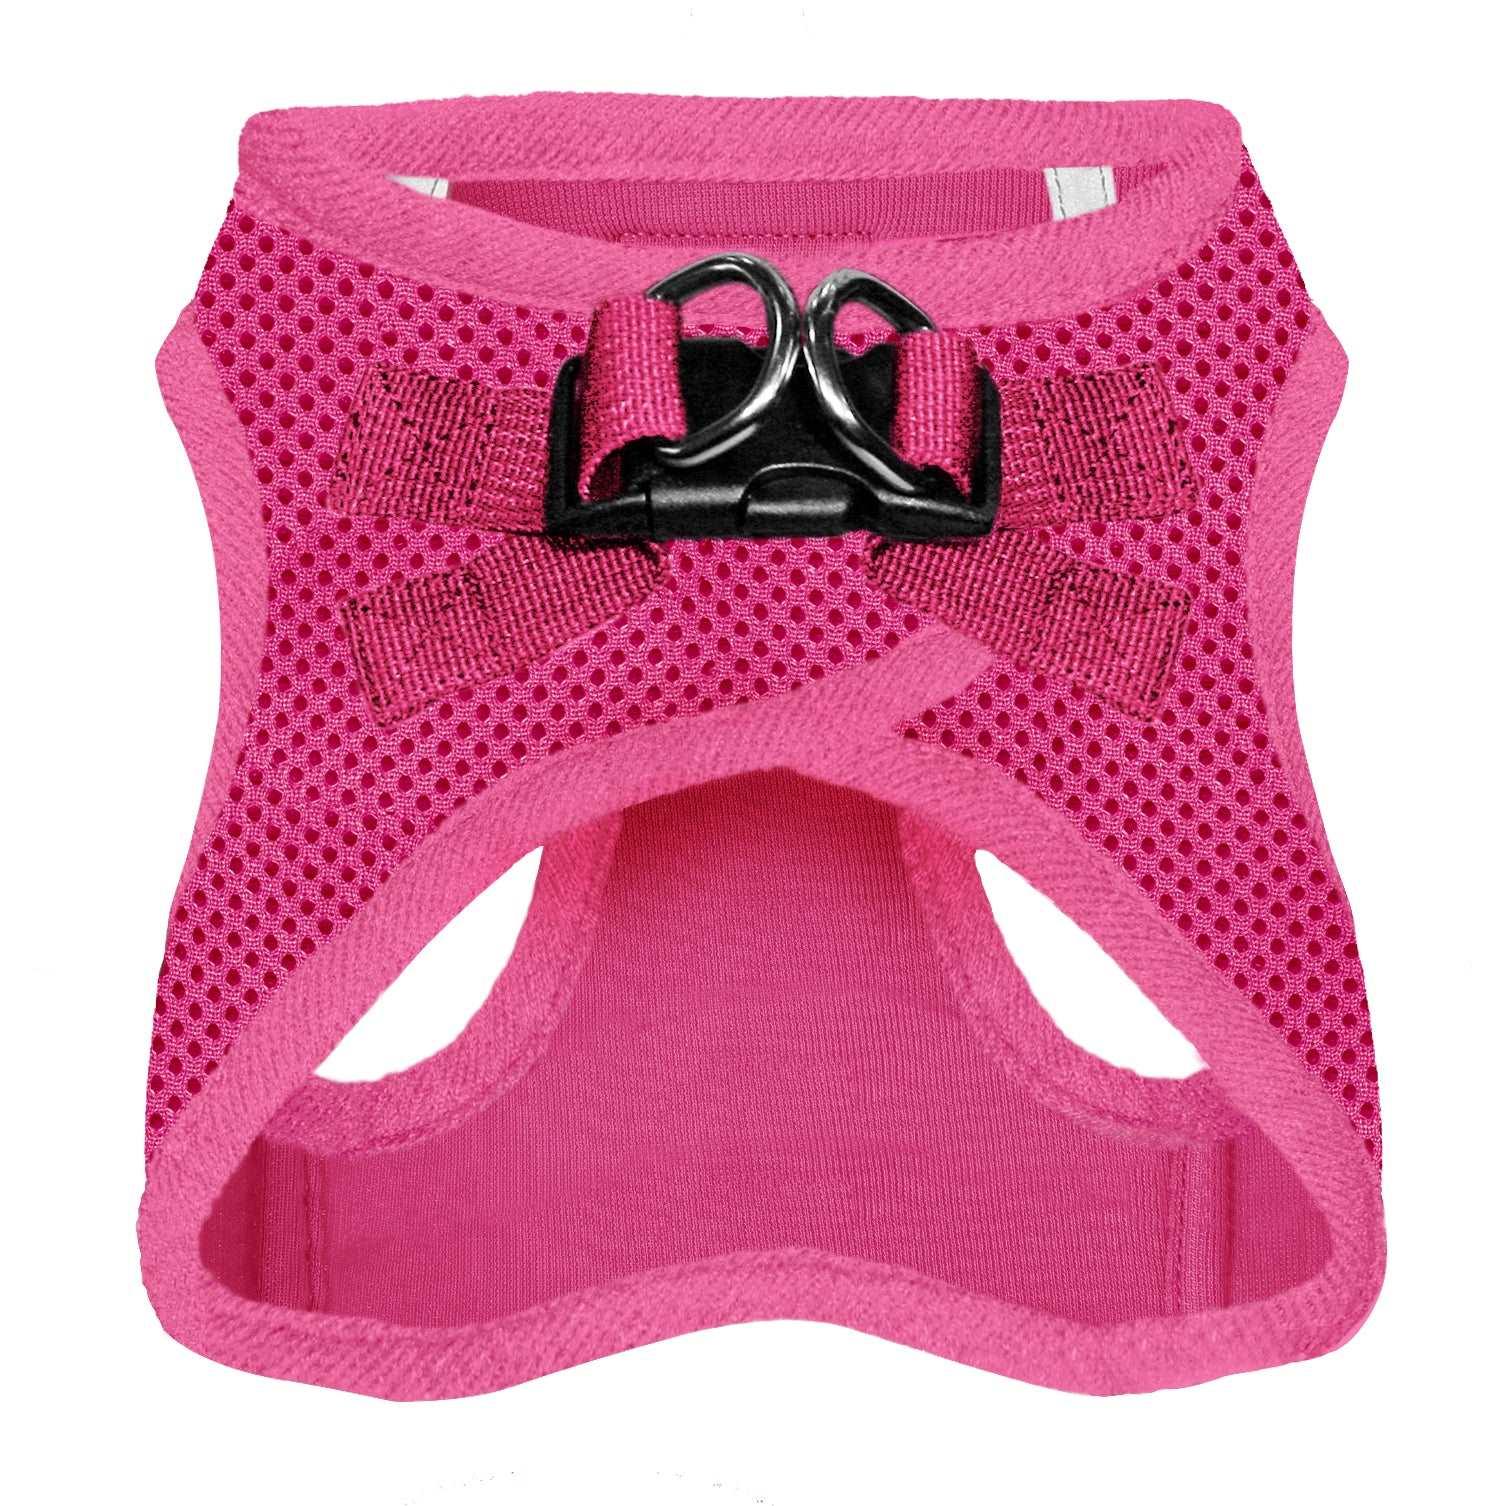 VOYAGER Step-In Air Pet Harness in Fuchsia with Matching Trim and Webbing - Black